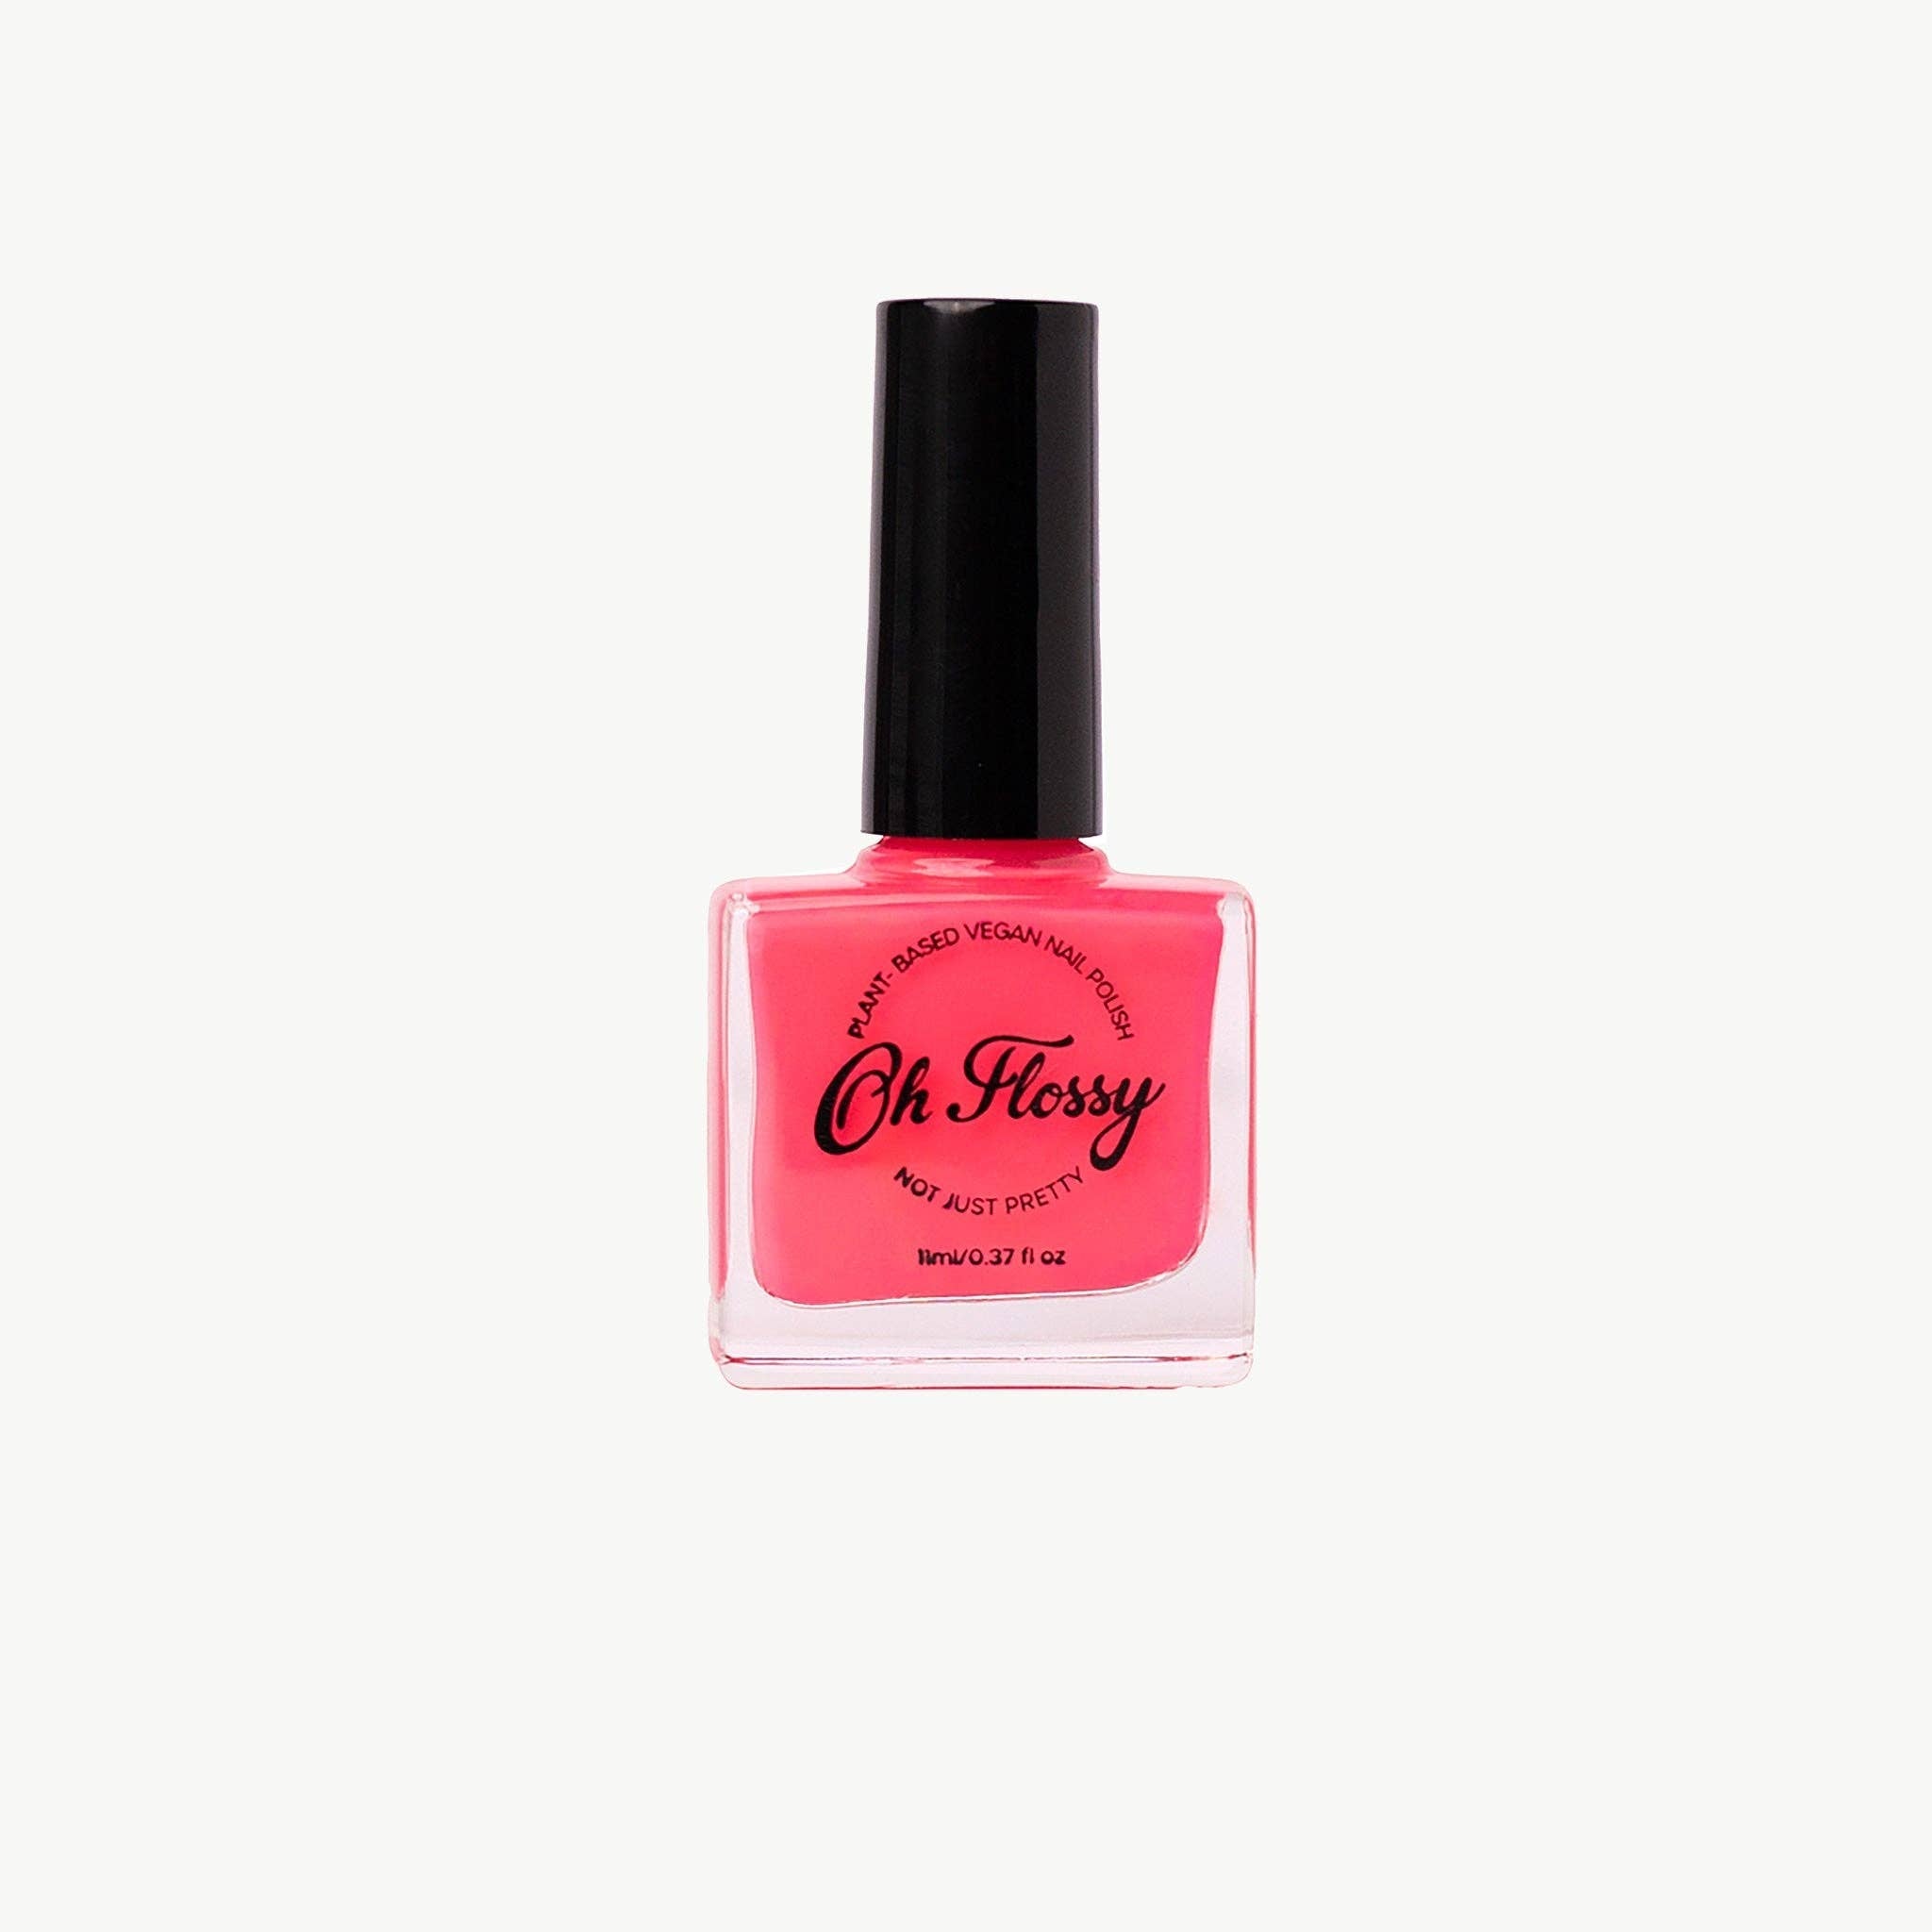 Oh Flossy Pink Pamper Nail Polish Set - Trio of Vivacious Pink Shades for Creative Little Manicurists